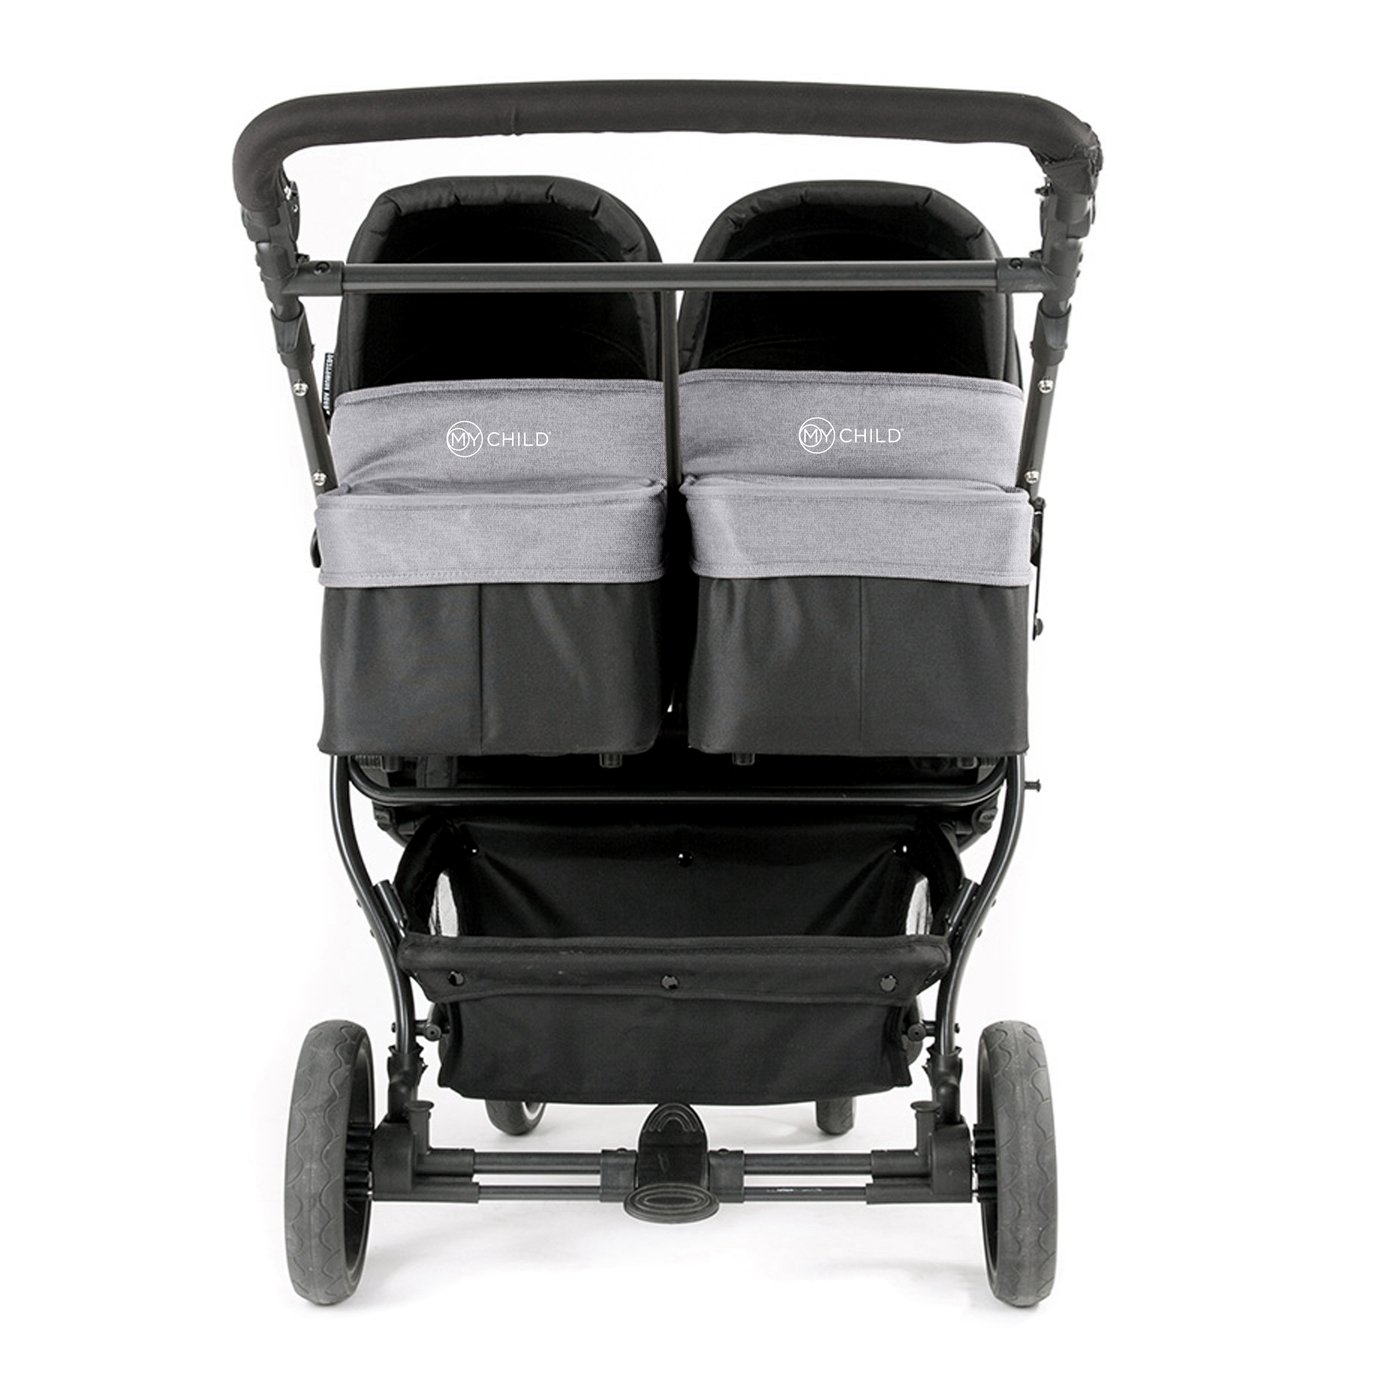 MyChild Easy Twin Main Carrycot Review